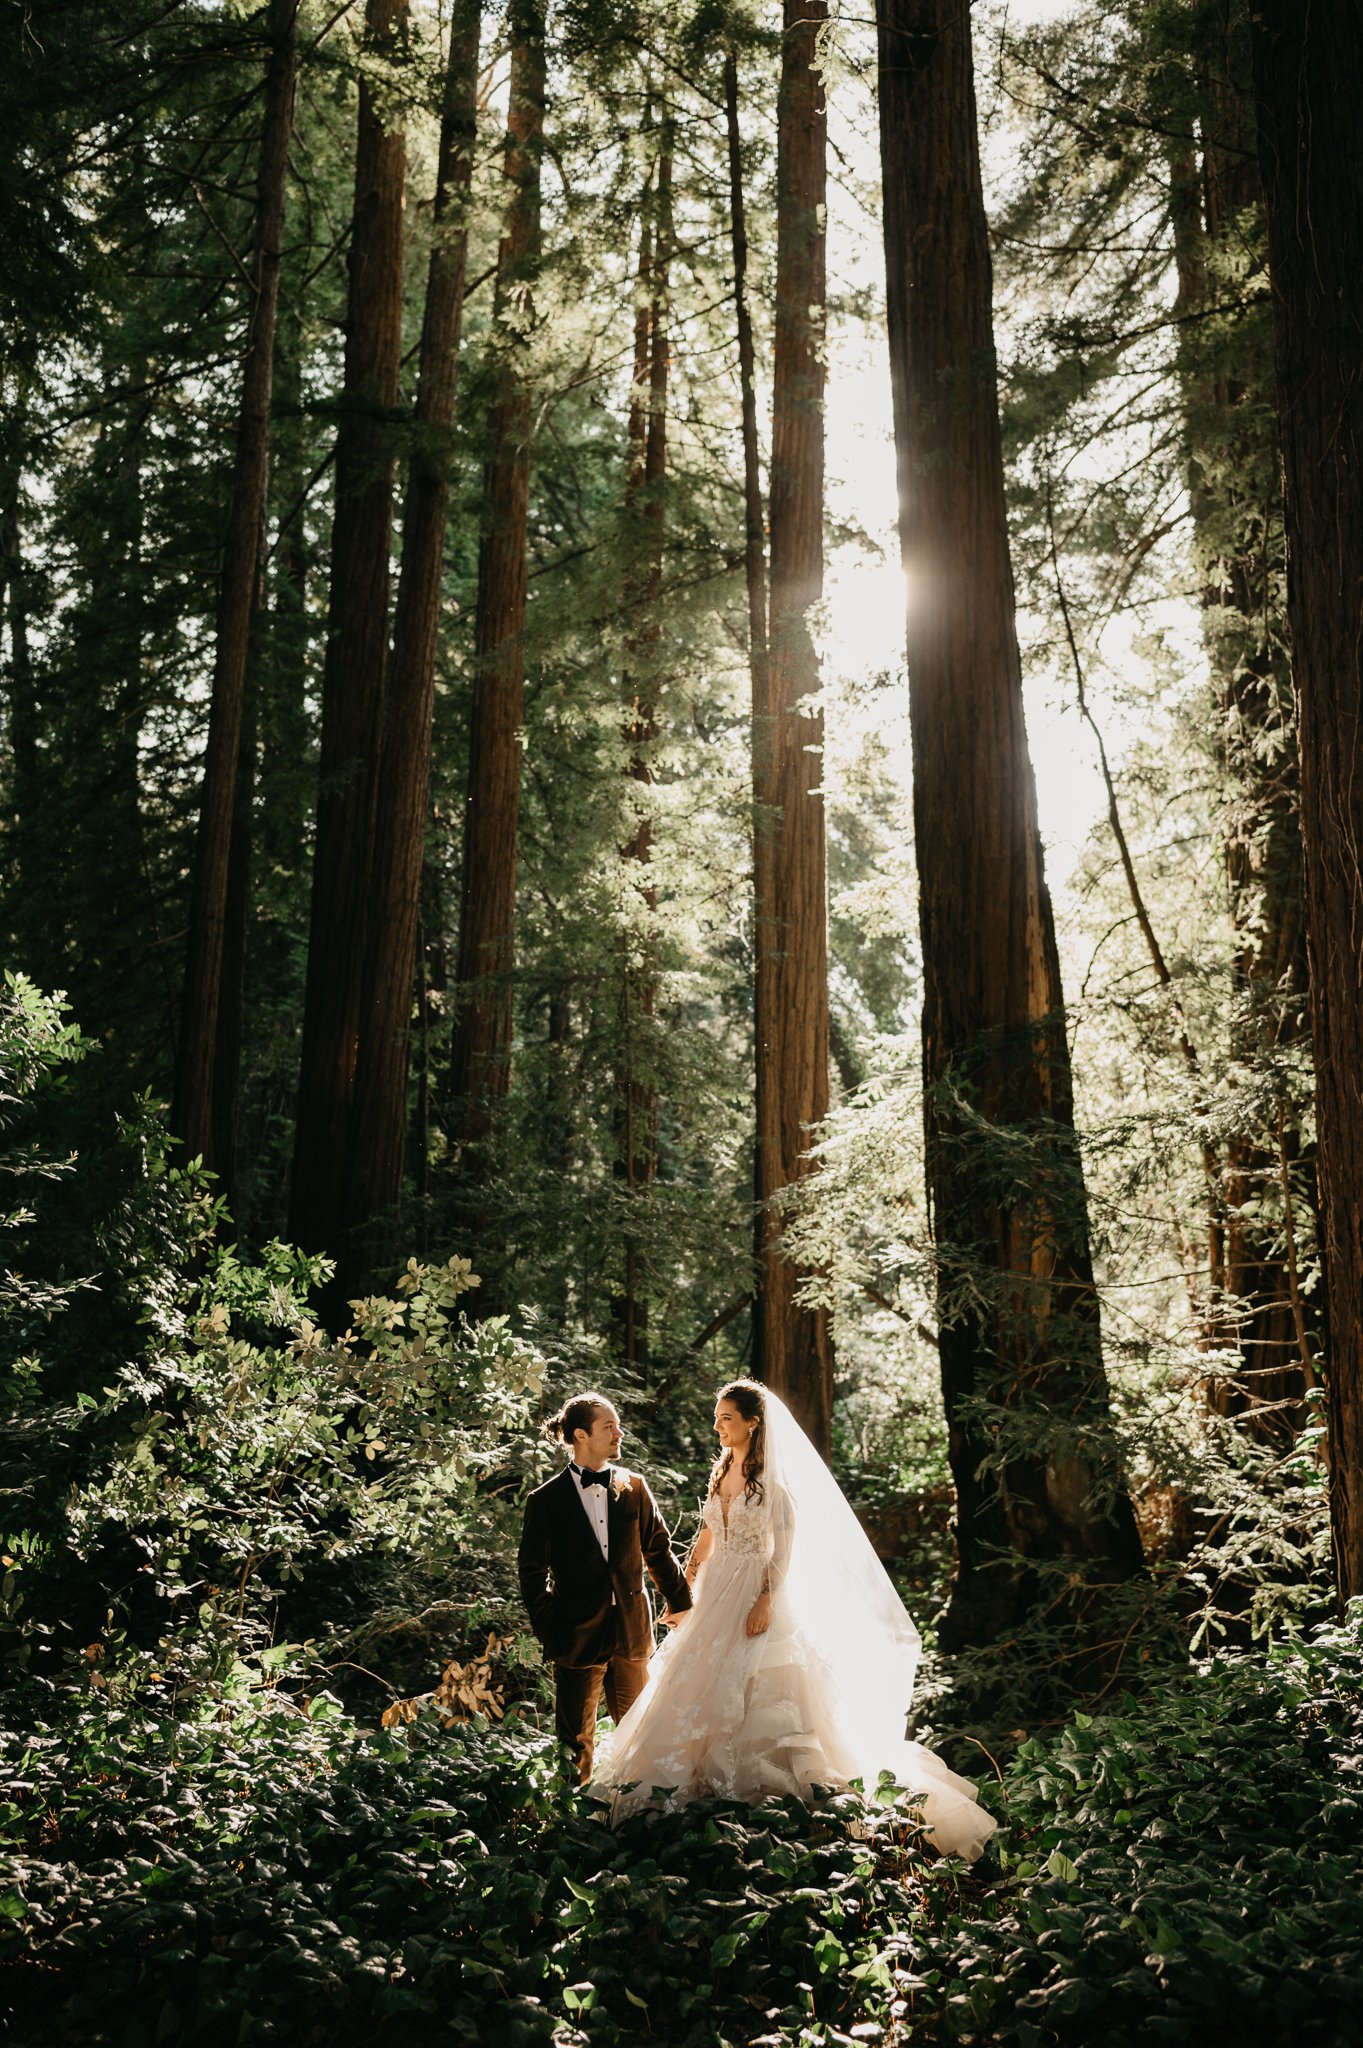 Big Sur Forest wedding bride and groom standing in forest with sun peeking through the trees